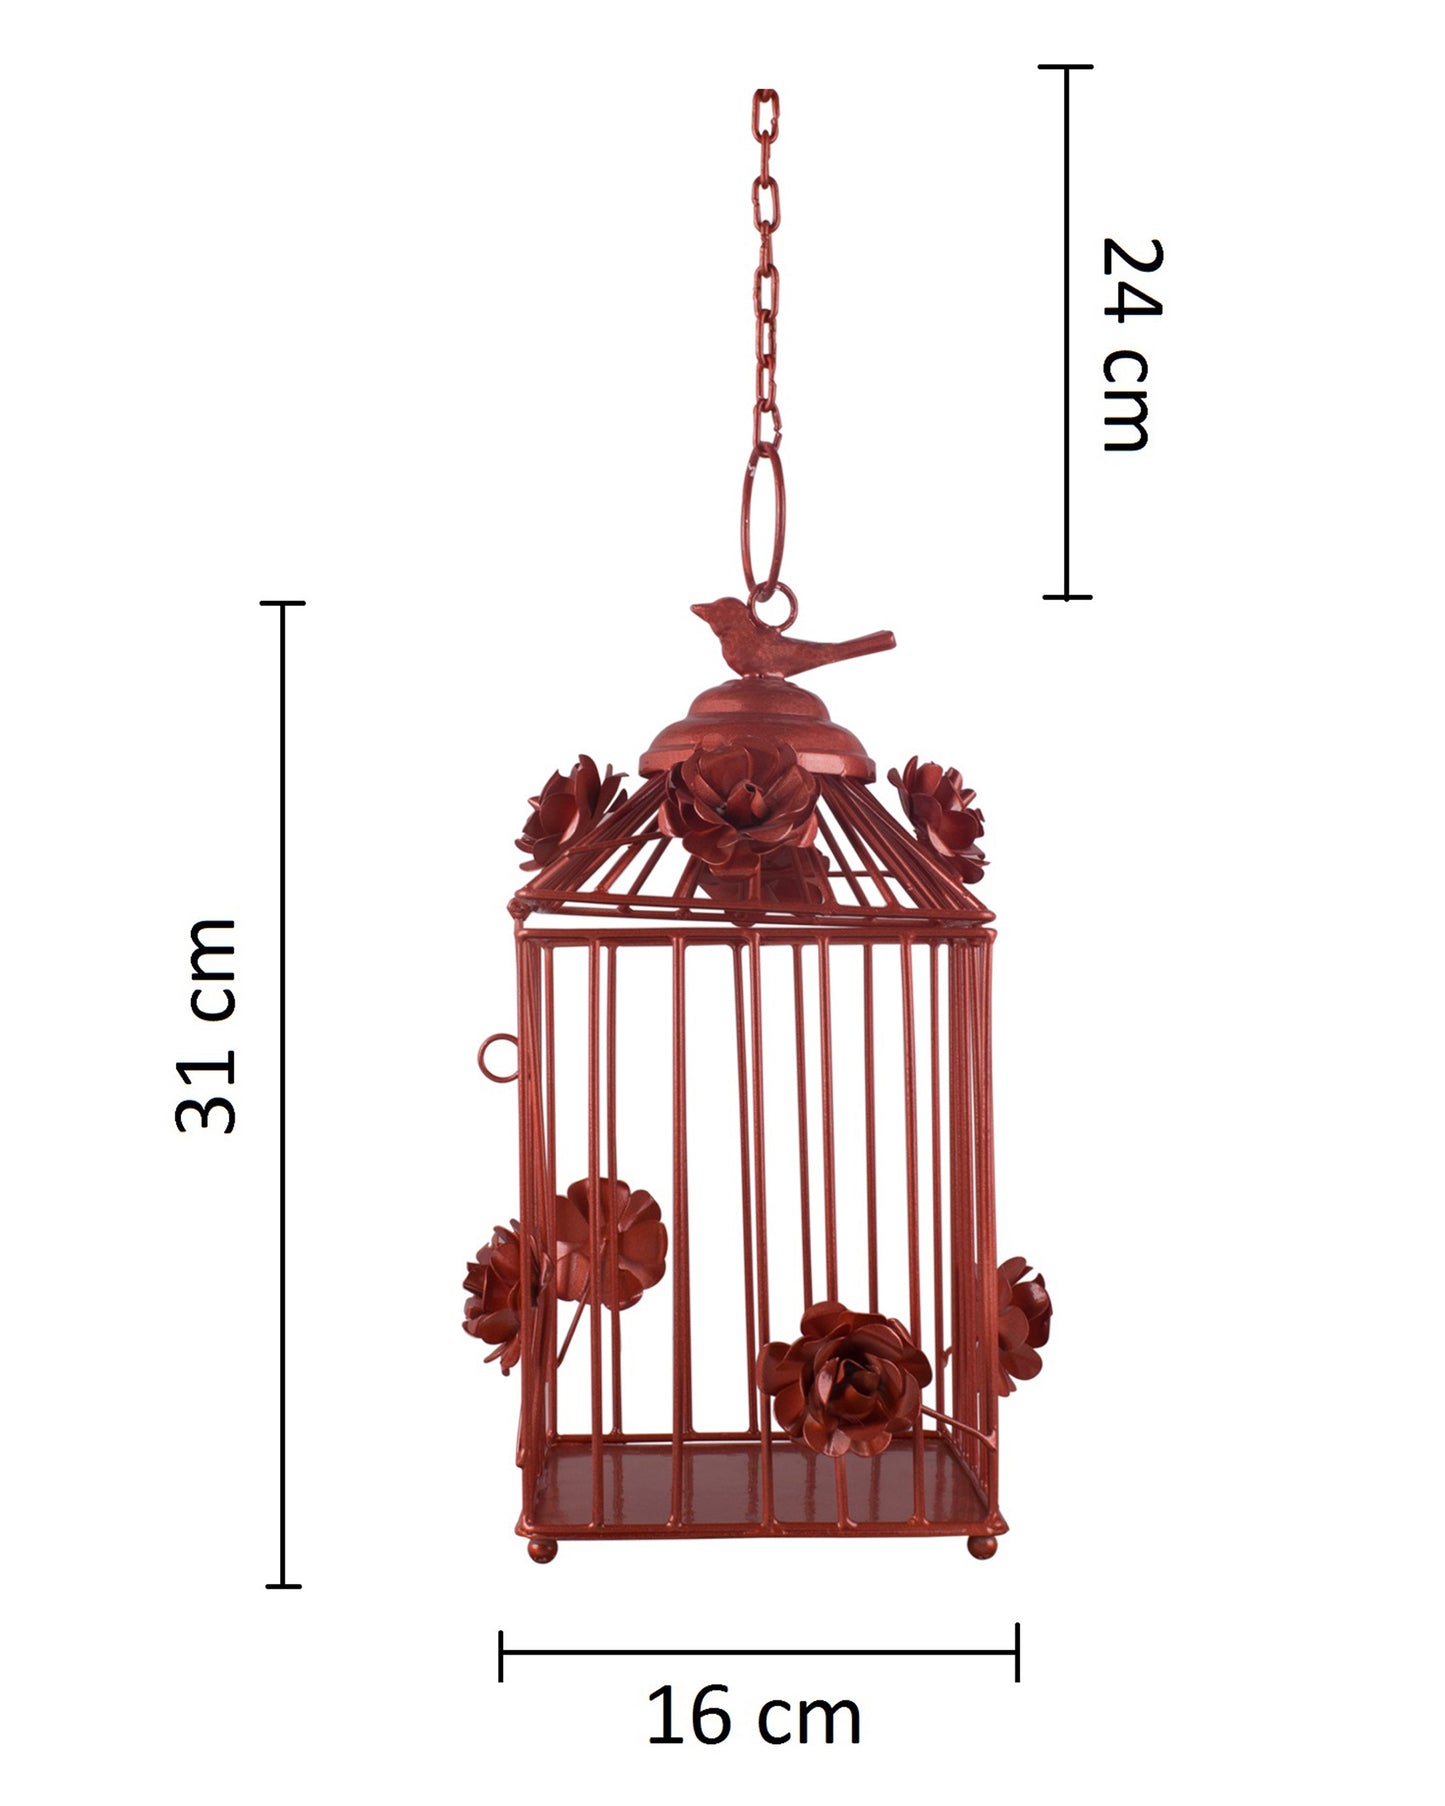 Decorative Hanging Bird Cage, Balcony/Patio Planter cage/hanging Candle holder